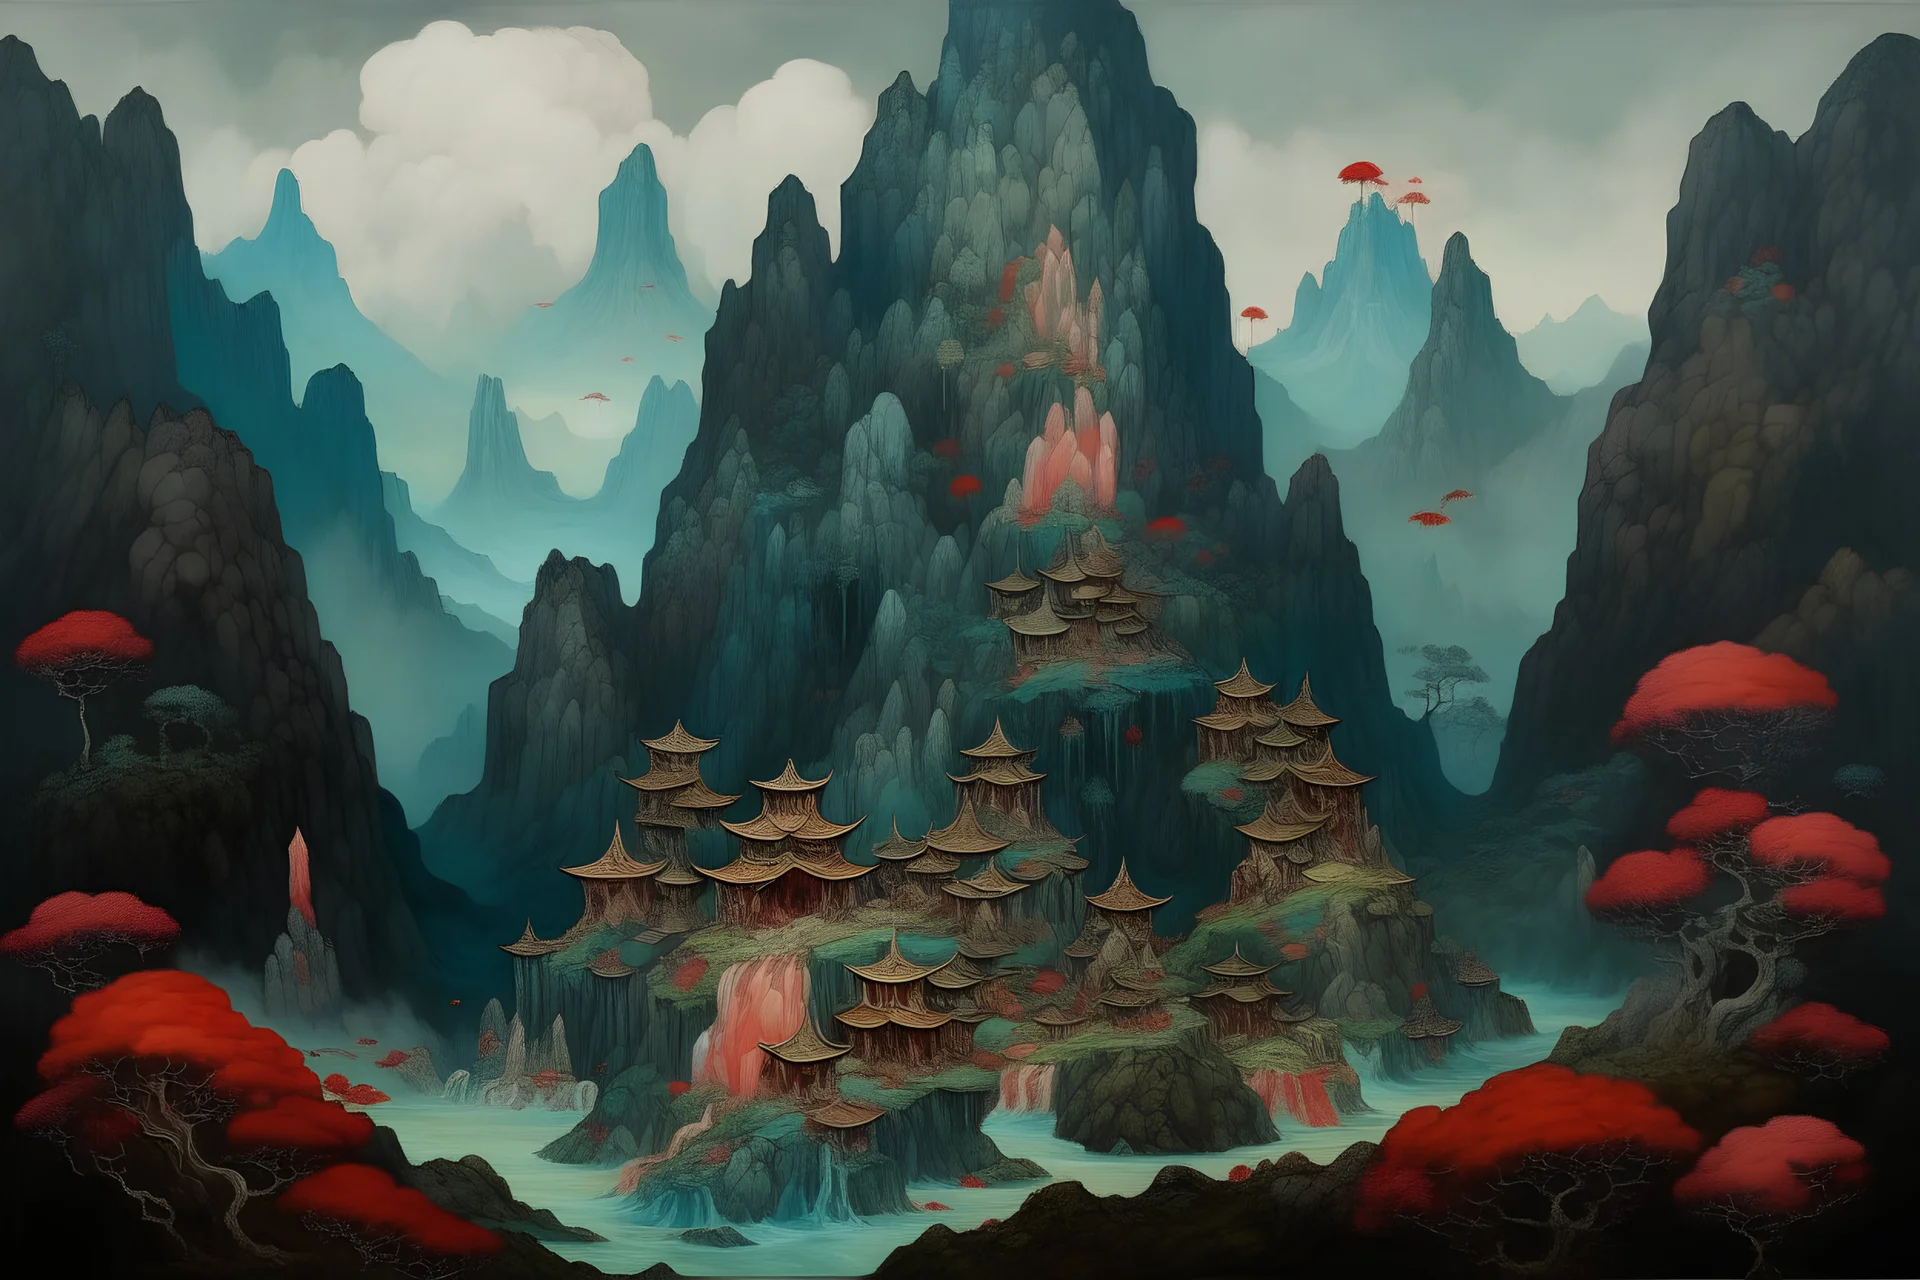 A mountain filled with nightmares painted by Qiu Ying